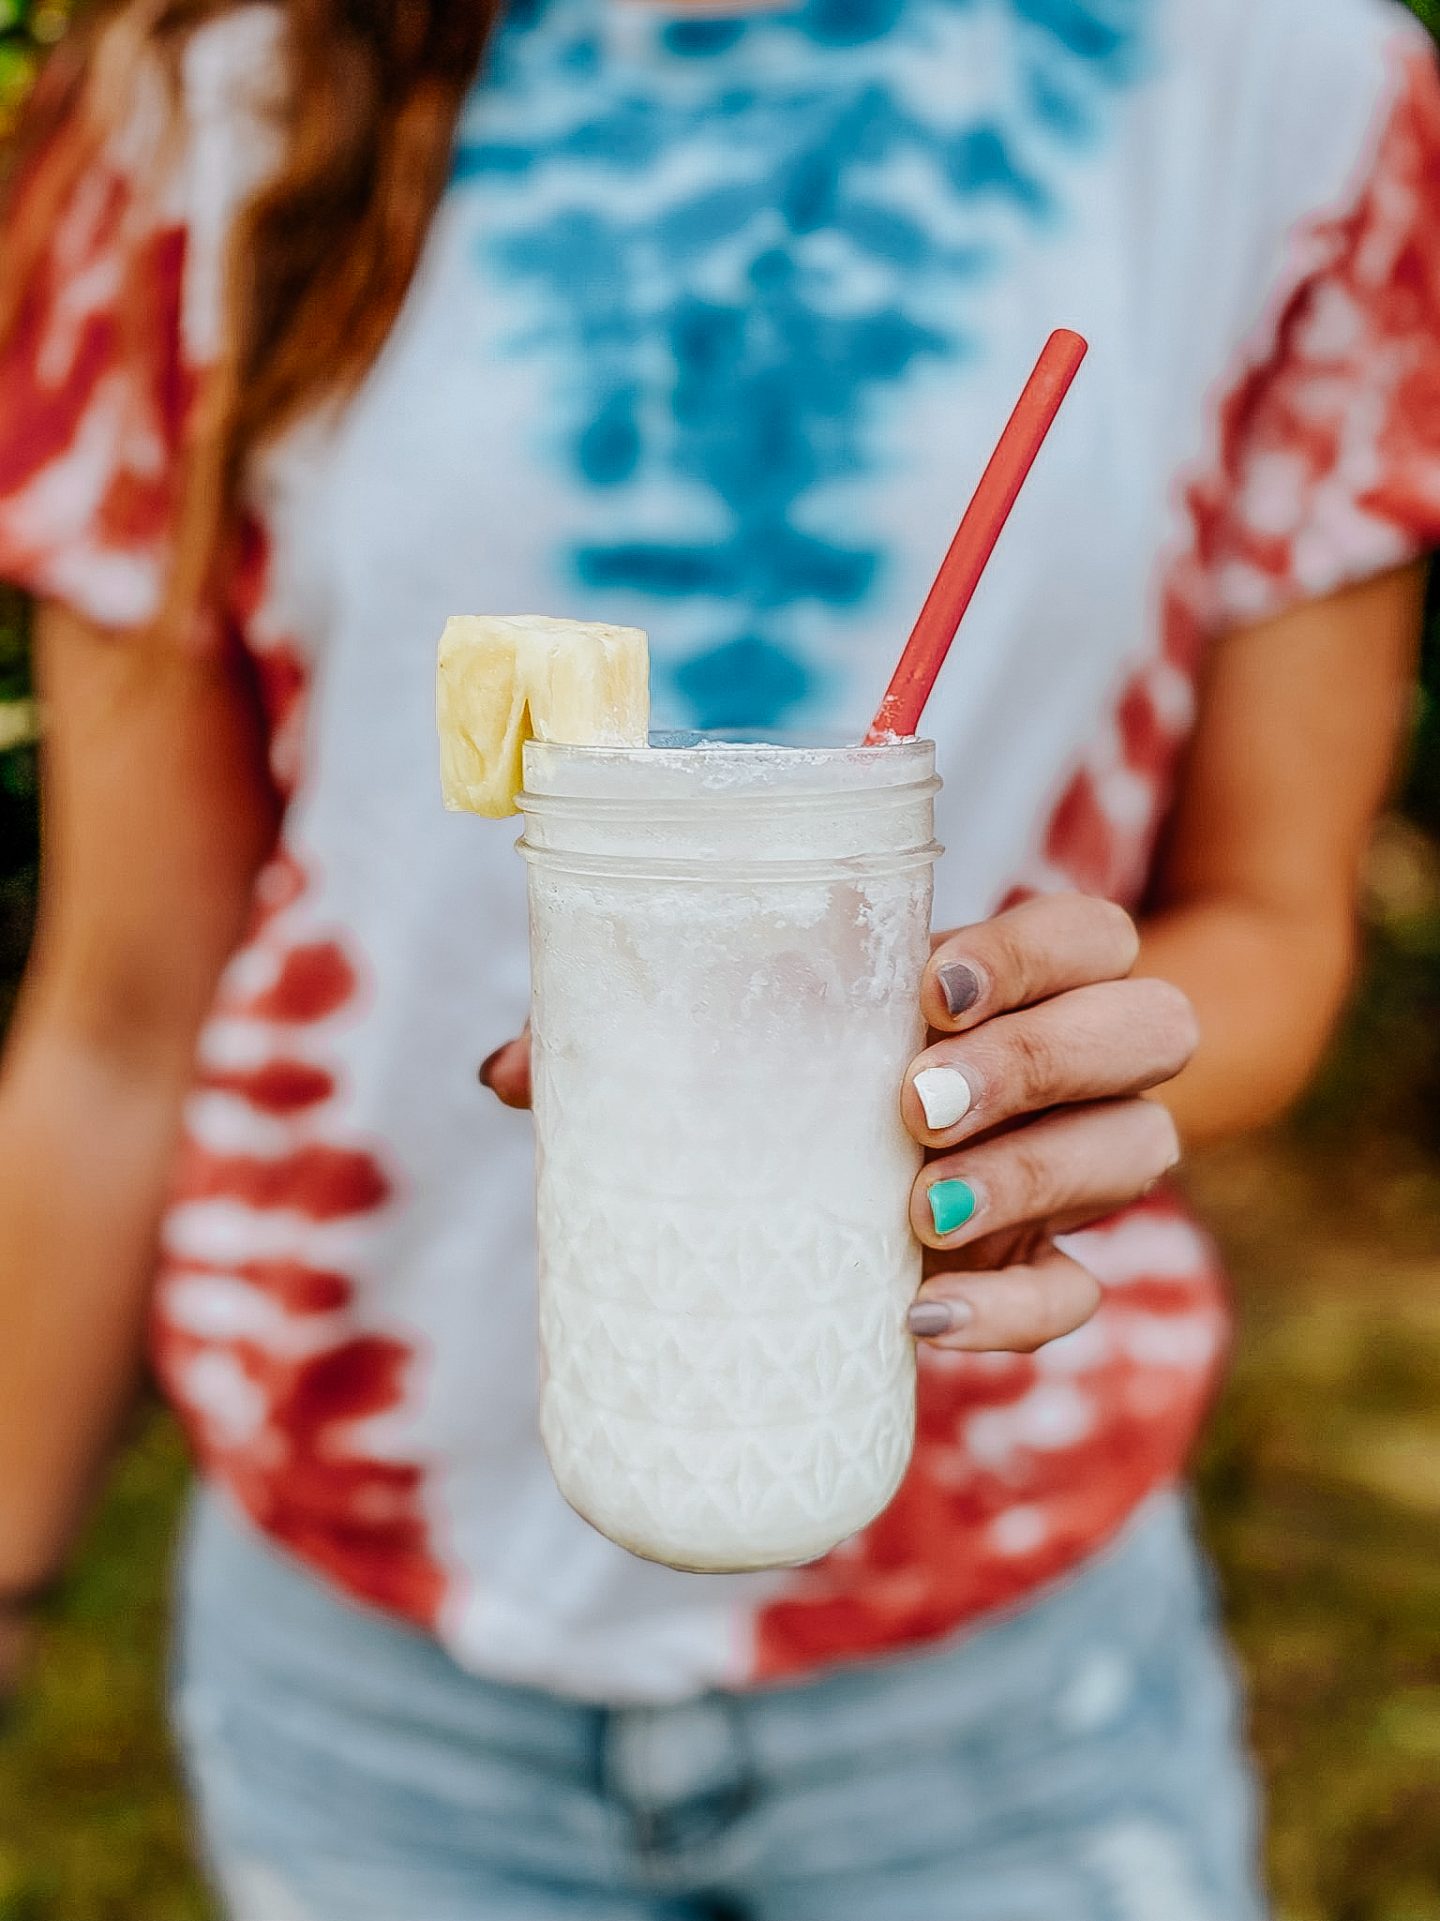 Food + lifestyle blogger, My Life Well Loved, shares her Skinny Piña Colada recipe! Click NOW to grab the recipe!